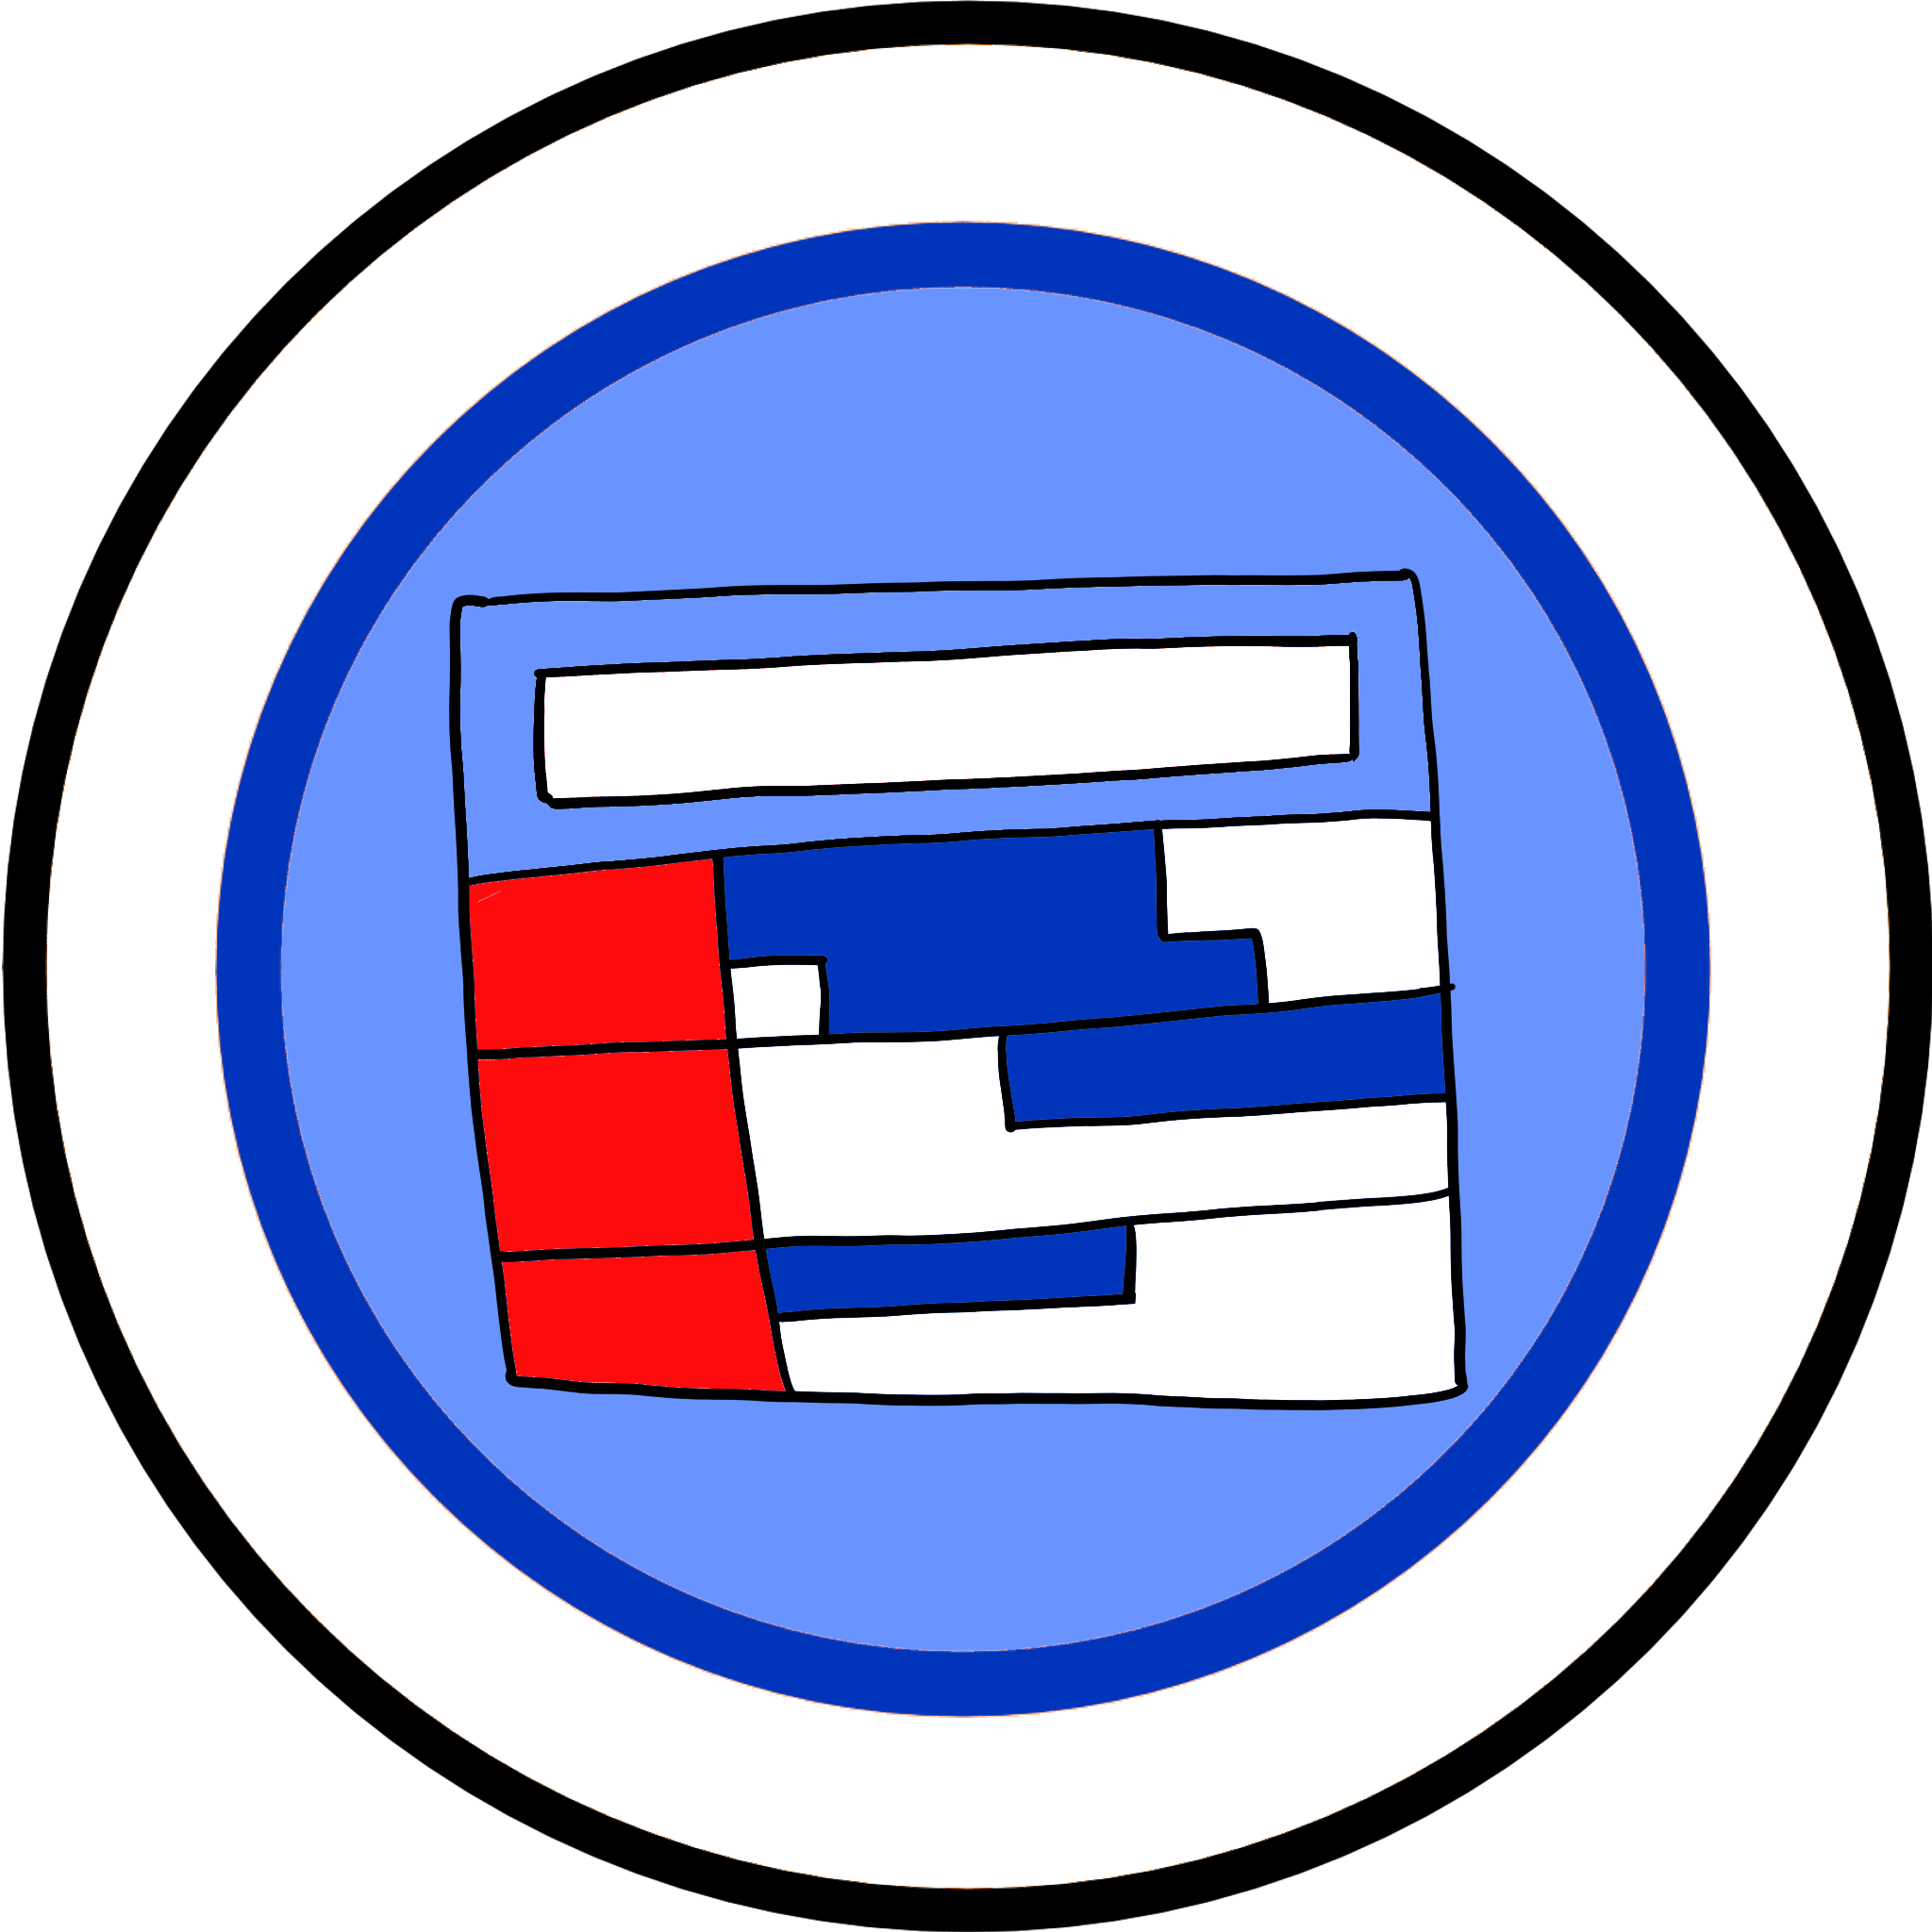 A Logo representing gop-tables - consist of a timetable